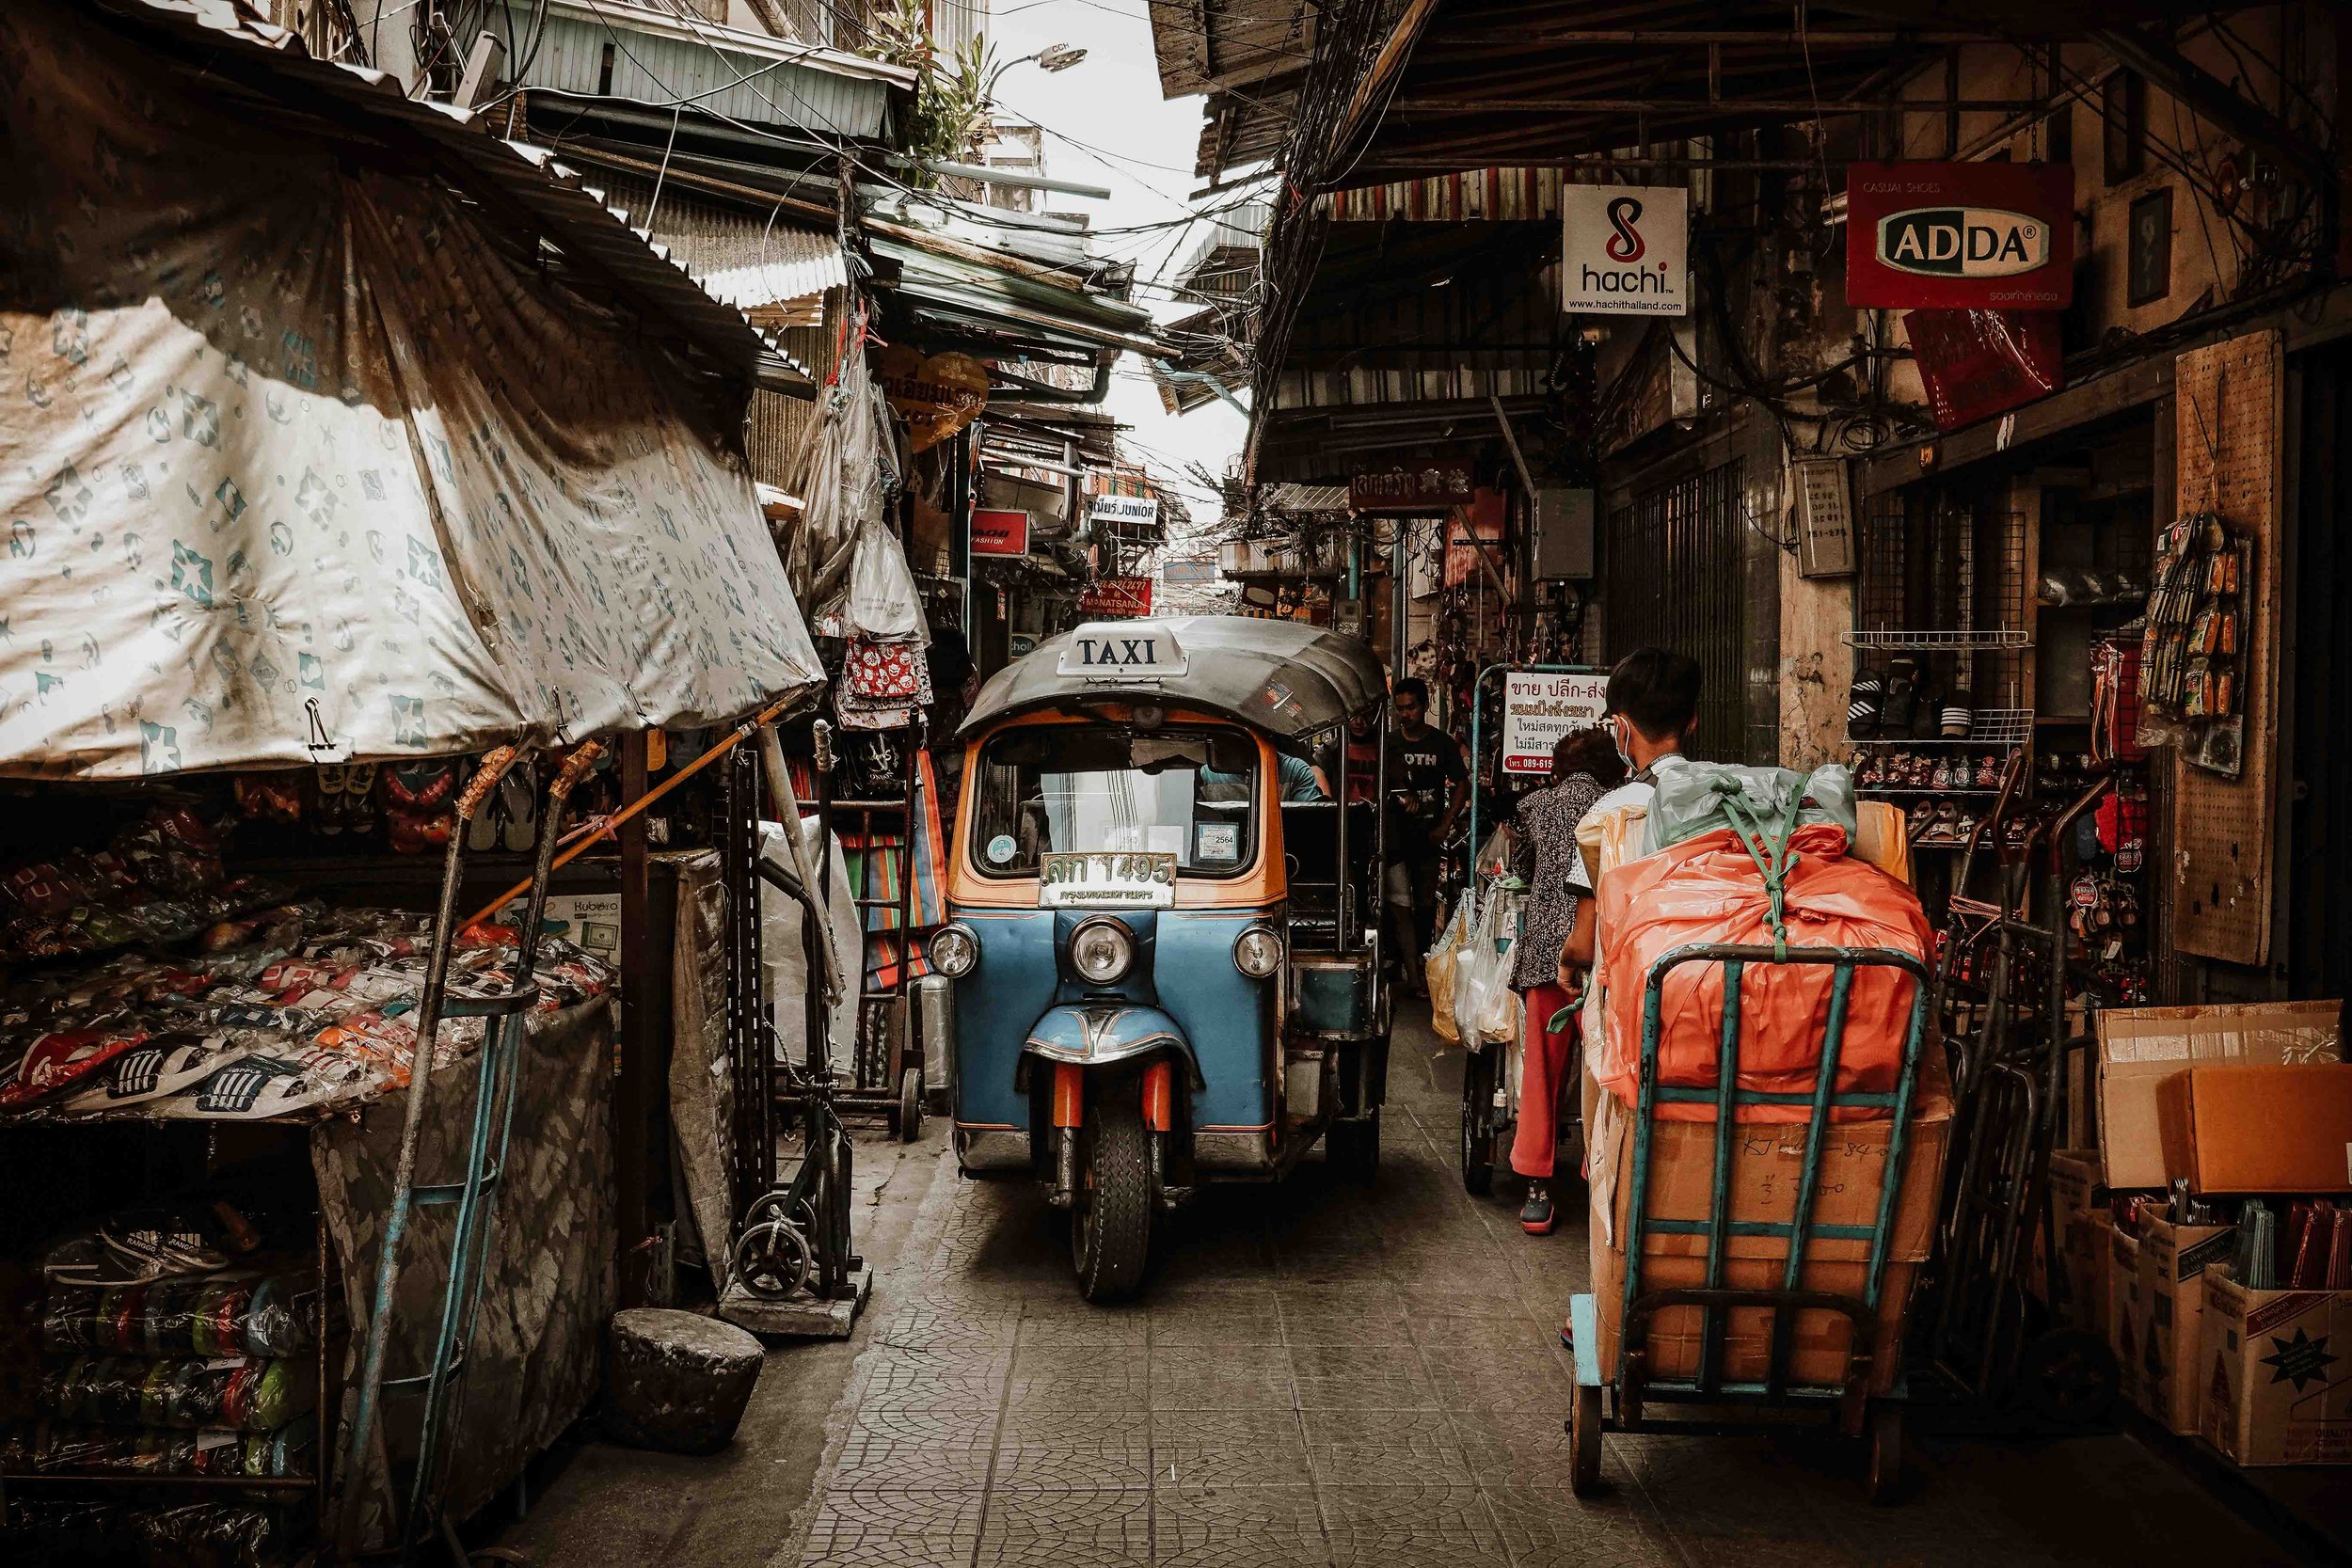 A tuk tuk passing through a street market in Thailand on 4 weeks in thailand